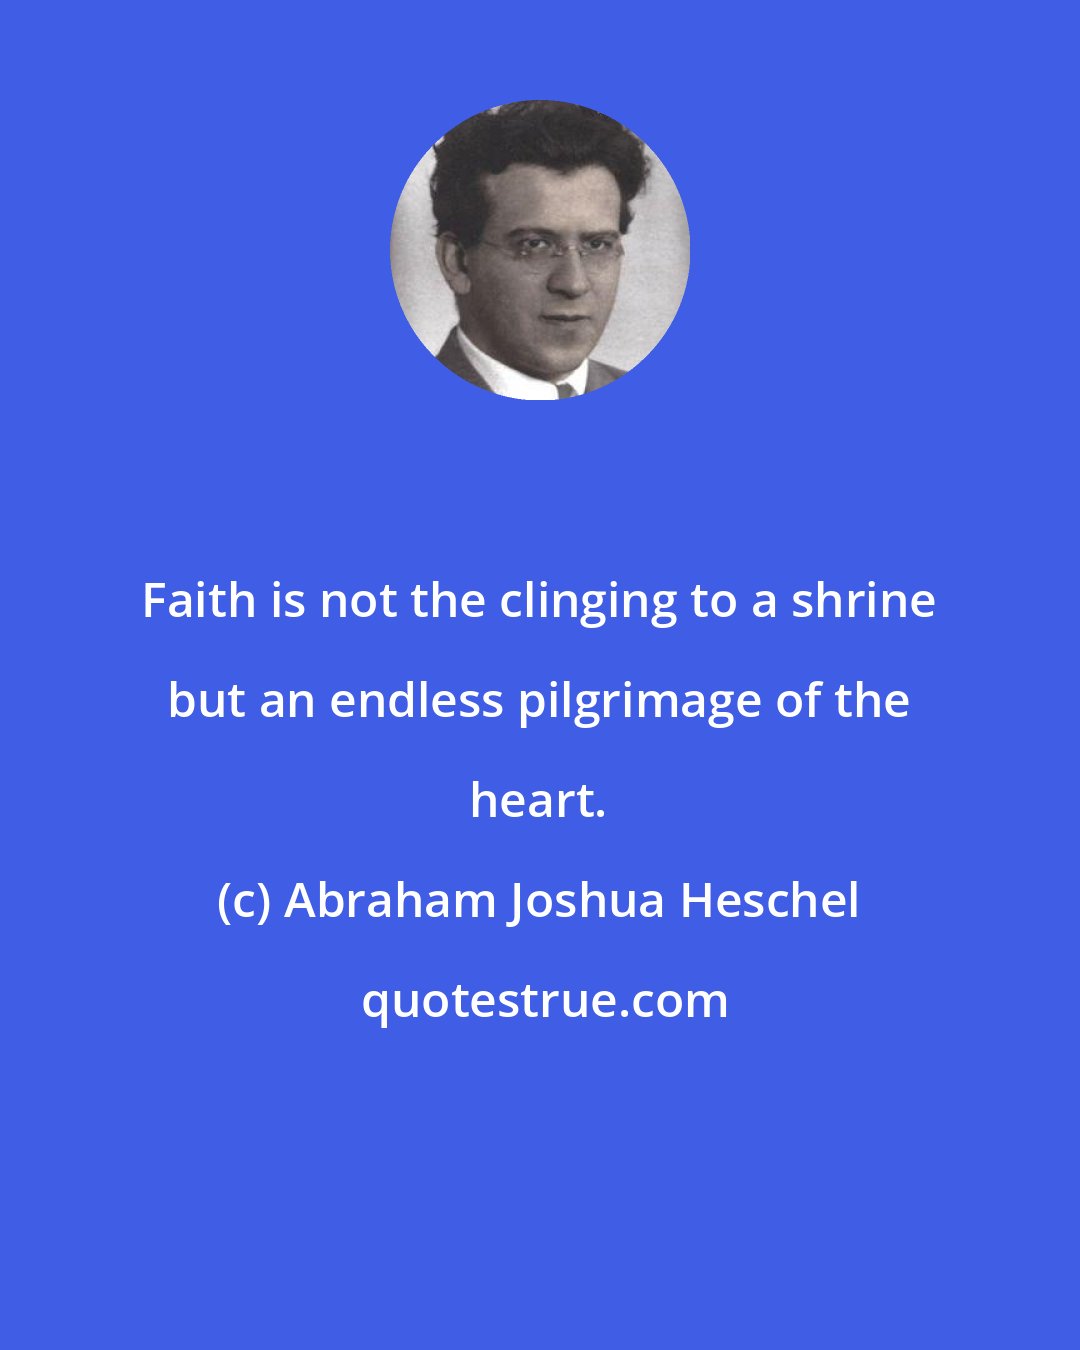 Abraham Joshua Heschel: Faith is not the clinging to a shrine but an endless pilgrimage of the heart.